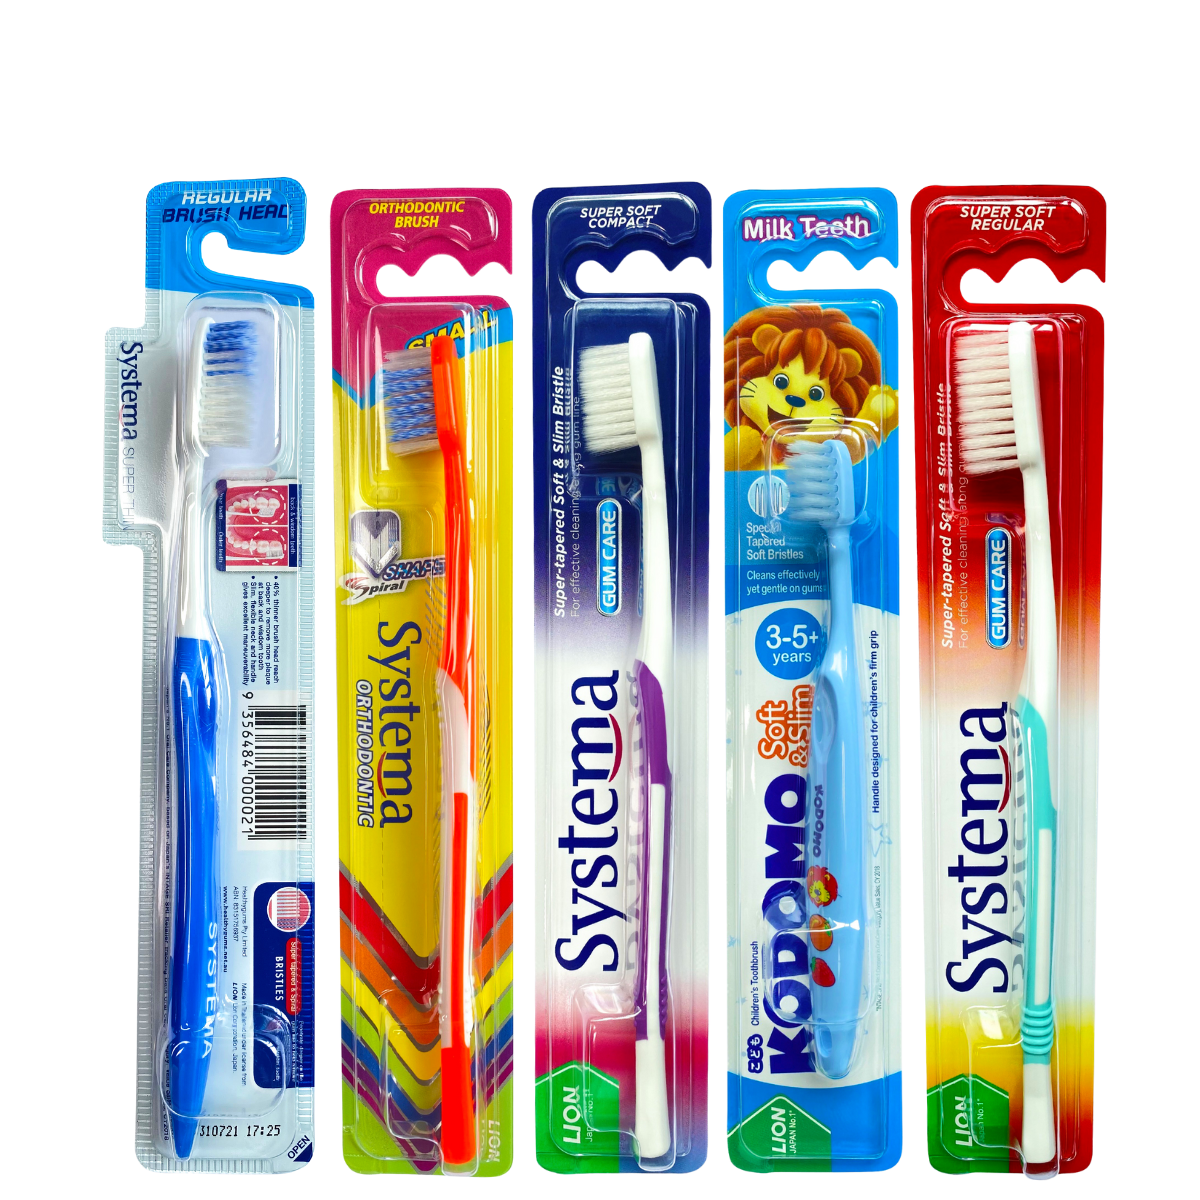 Systema Toothbrushes | Healthygums | Online Systema Toothbrush Store | Buy Systema Toothbrushes Online | Systema Gum Care Toothbrush